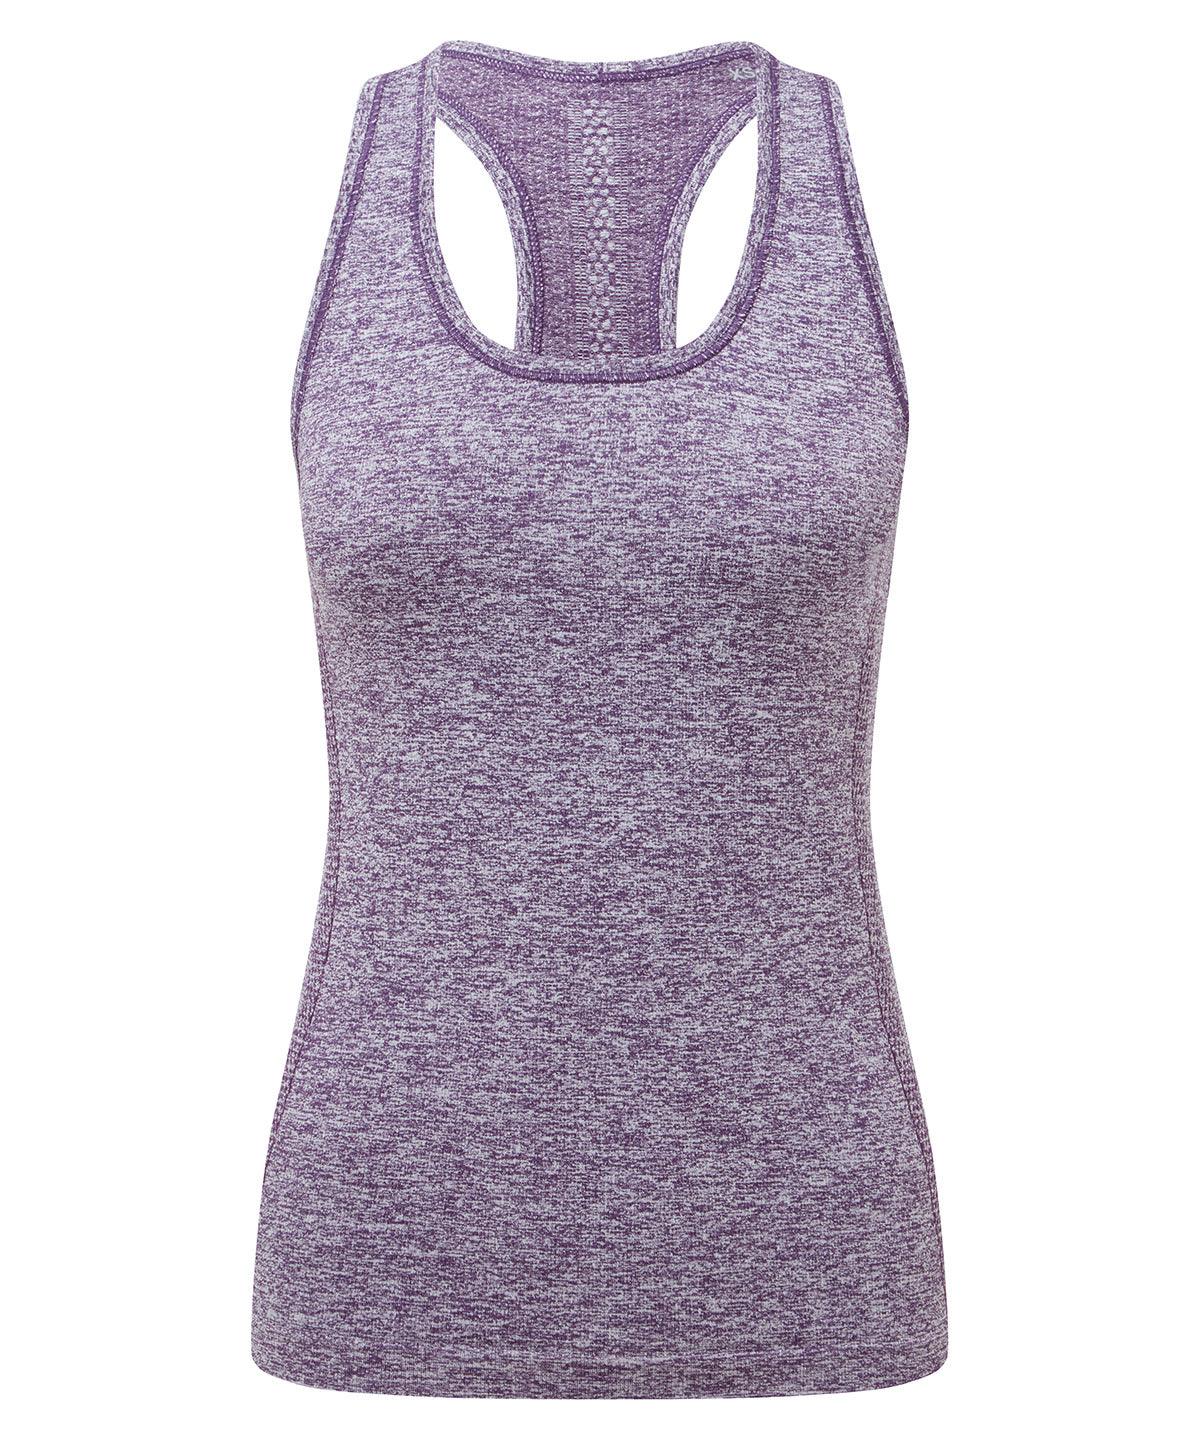 Purple - Women's TriDri® seamless '3D fit' multi-sport sculpt vest Vests TriDri® Activewear & Performance, Back to the Gym, Co-ords, Exclusives, Gymwear, Must Haves, New Colours For 2022, Rebrandable, Sports & Leisure, T-Shirts & Vests Schoolwear Centres